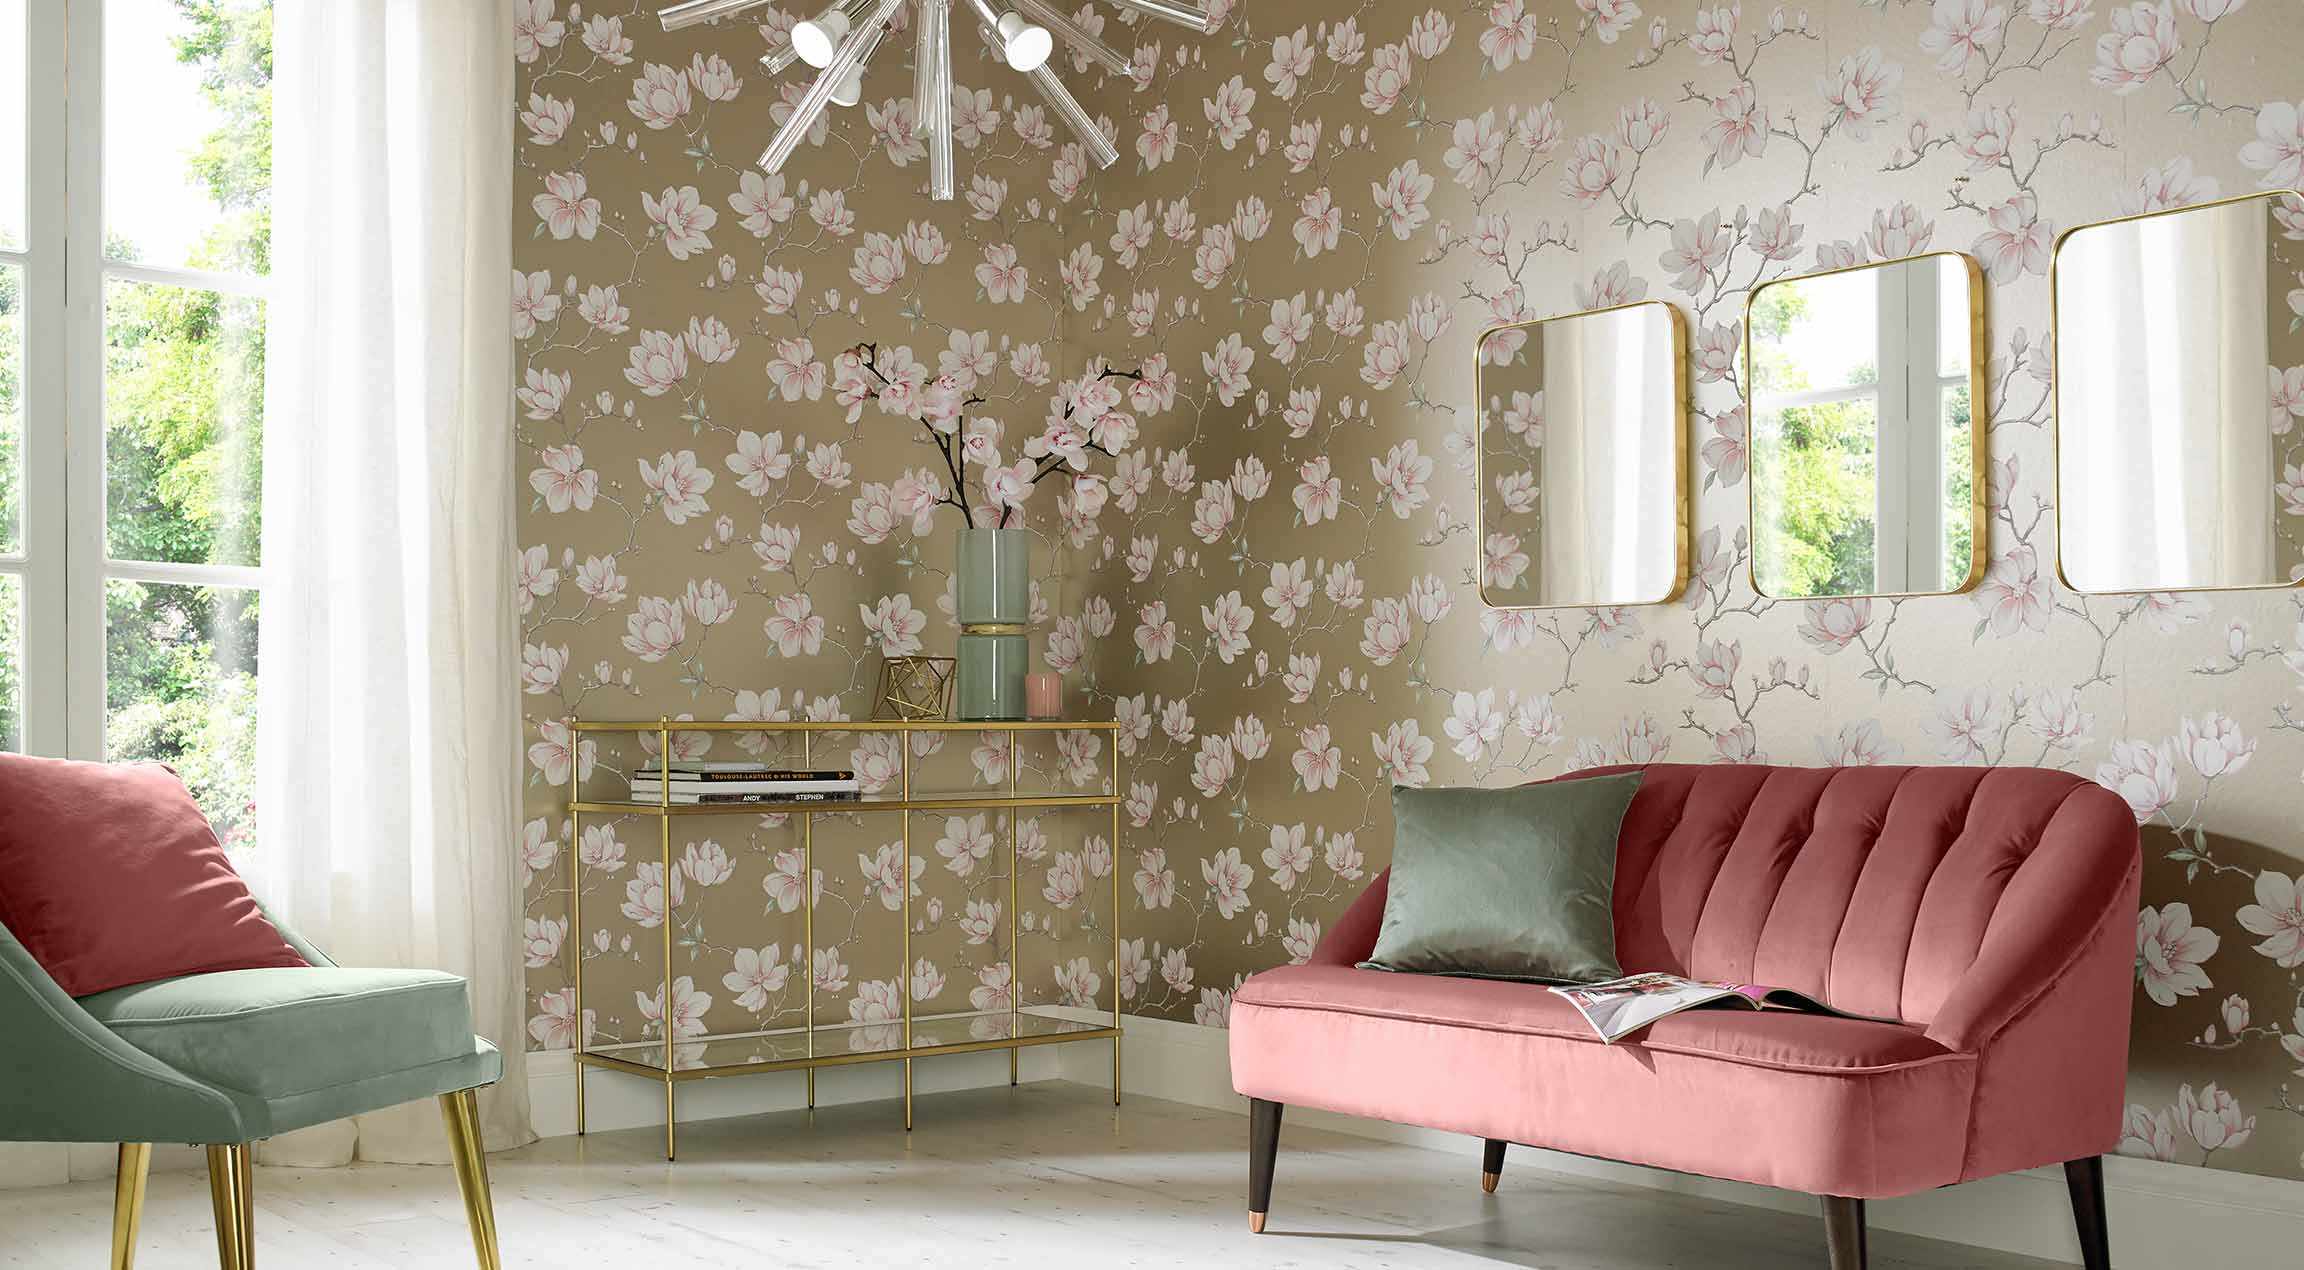 an example of a beautiful decor of wallpaper for the living room